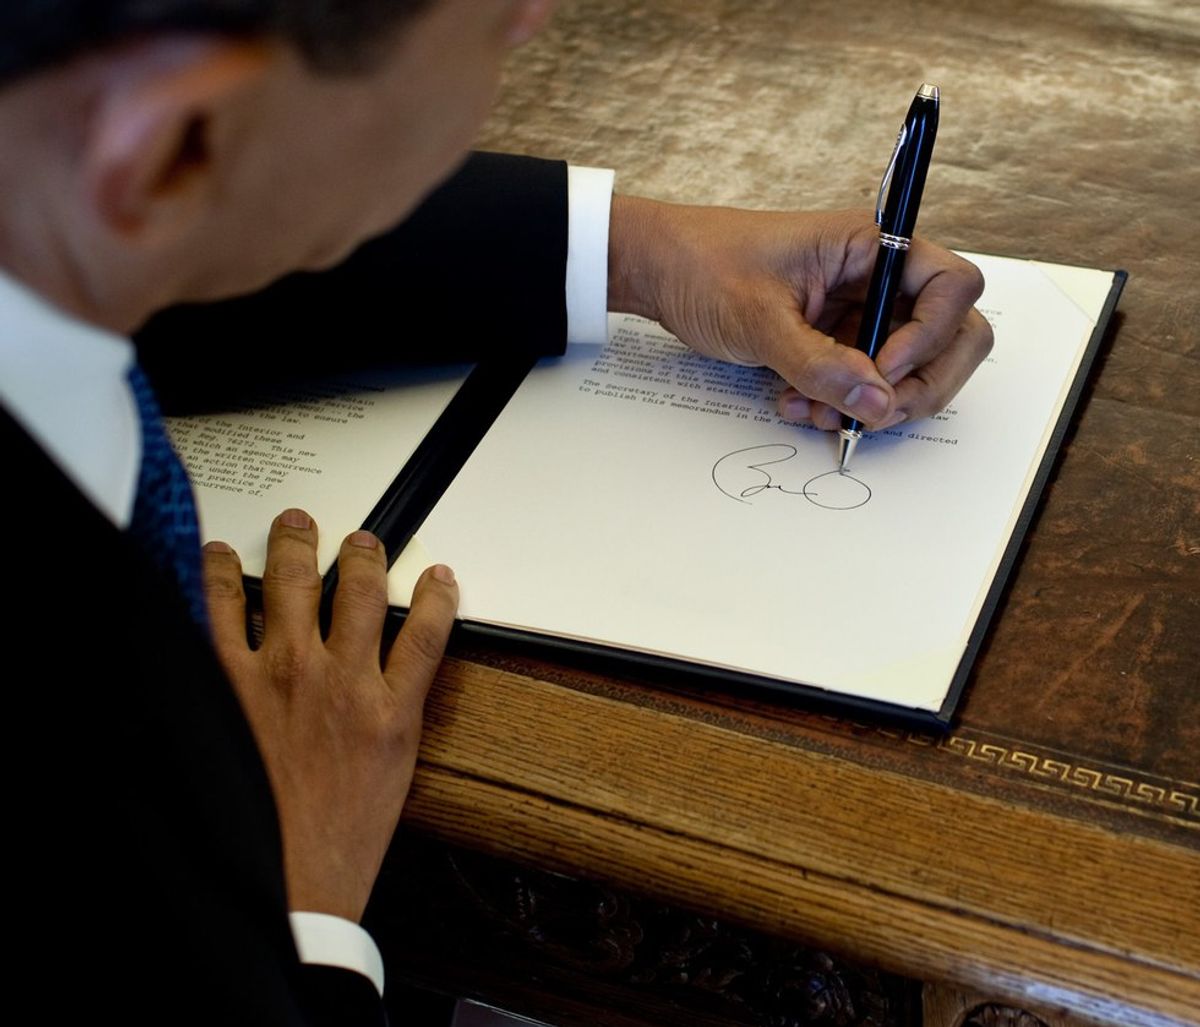 Executive Orders: How Does Obama Stack Up?